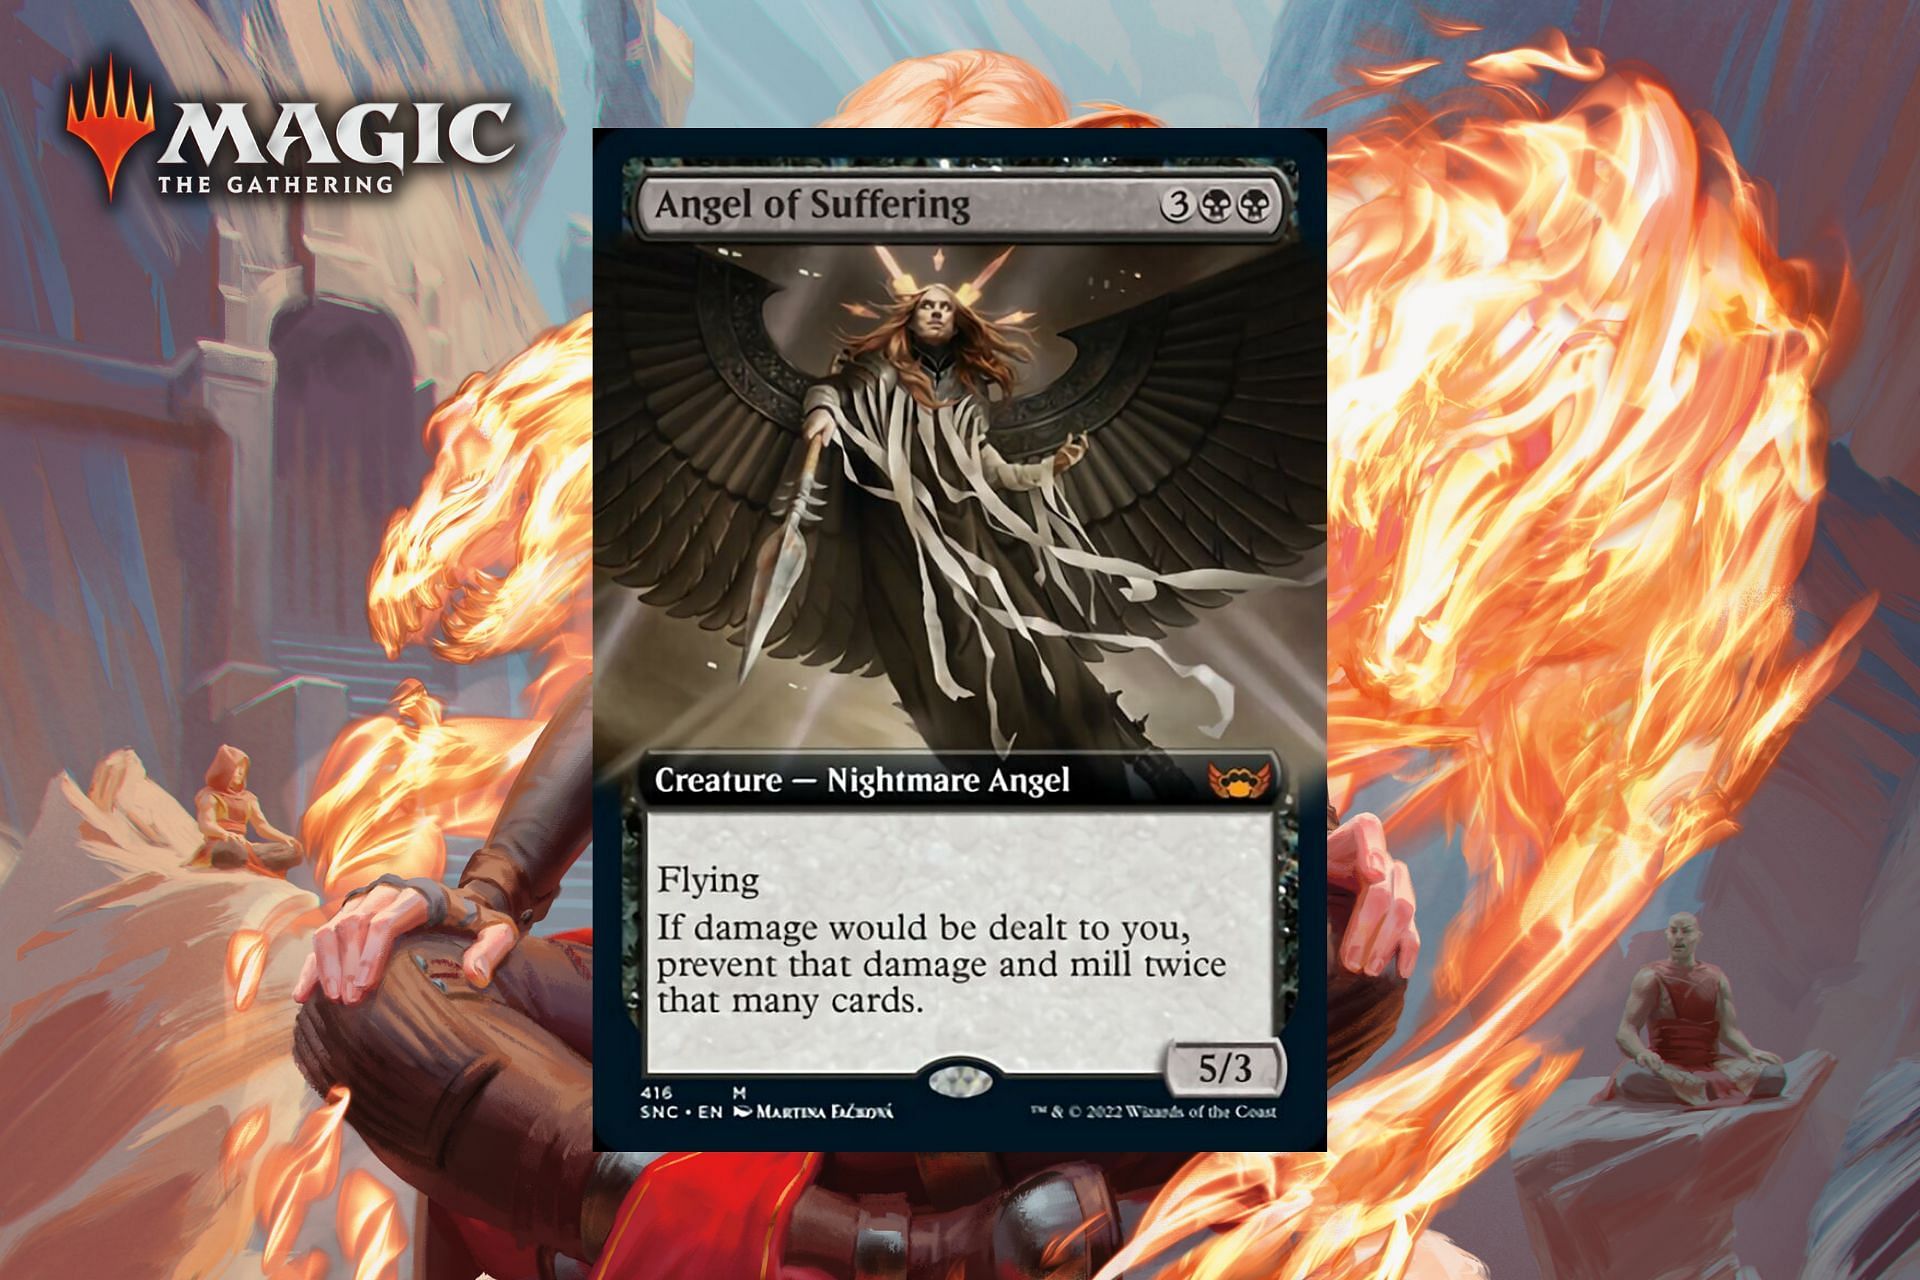 Angel of Suffering only makes others suffer with its ability to prevent damage (Image via Wizards of the Coast)